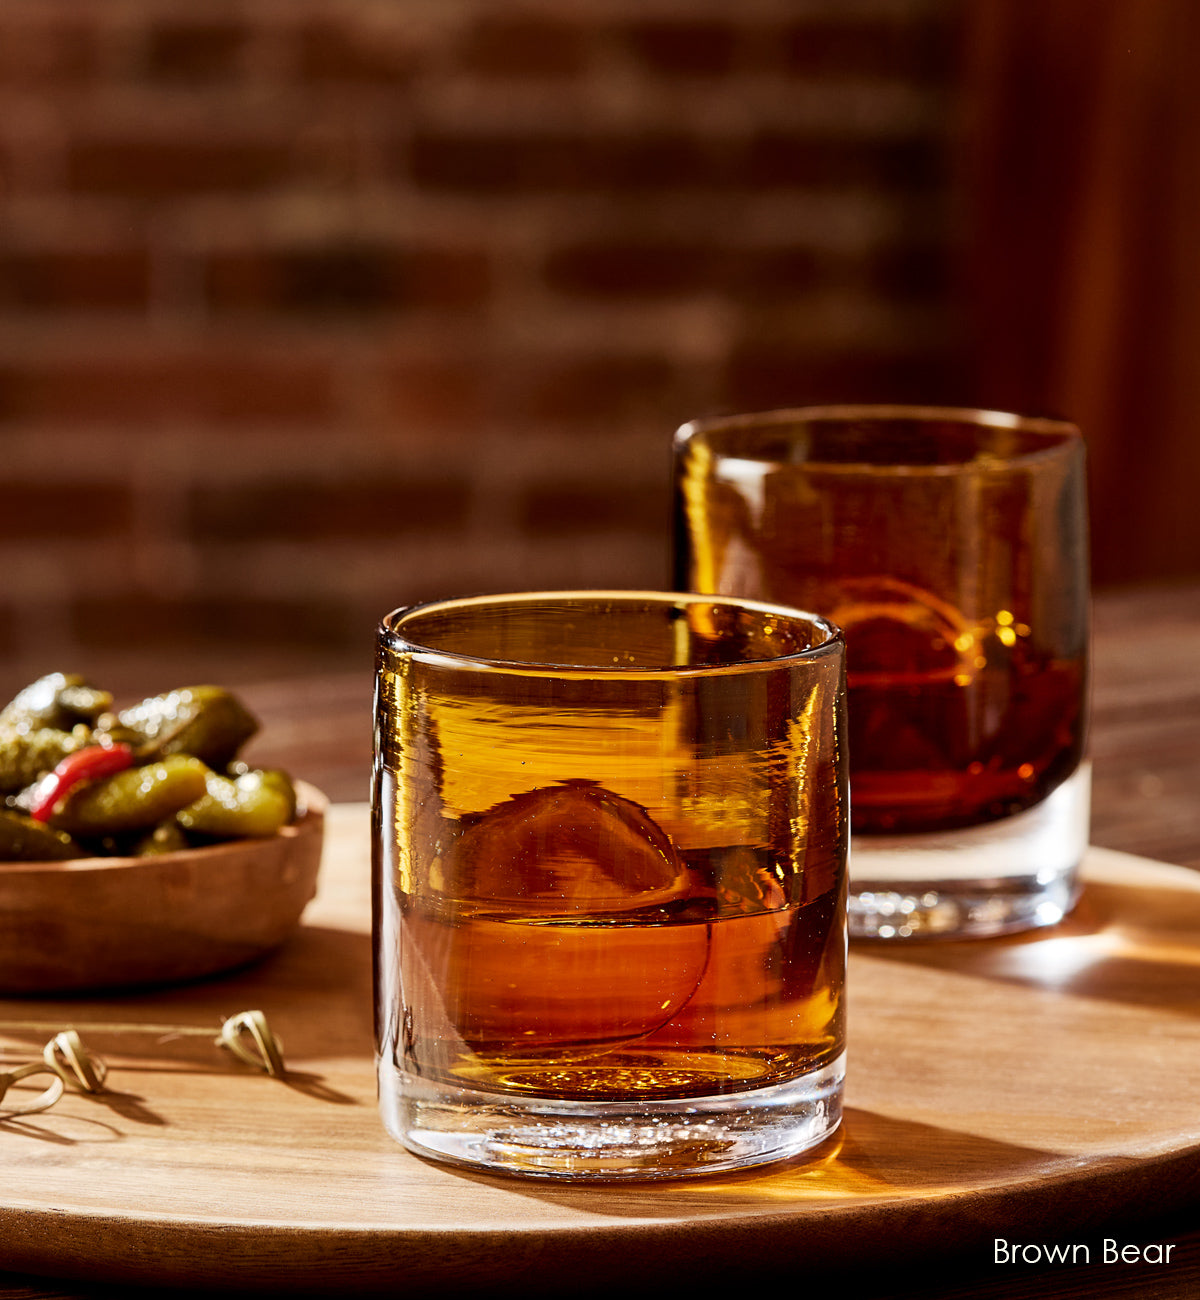 two Brown Bear rockers, dark brown transparent hand-blown glass lowball drinking glasses with liquid and ice, atop a wood cutting board next to pickles.